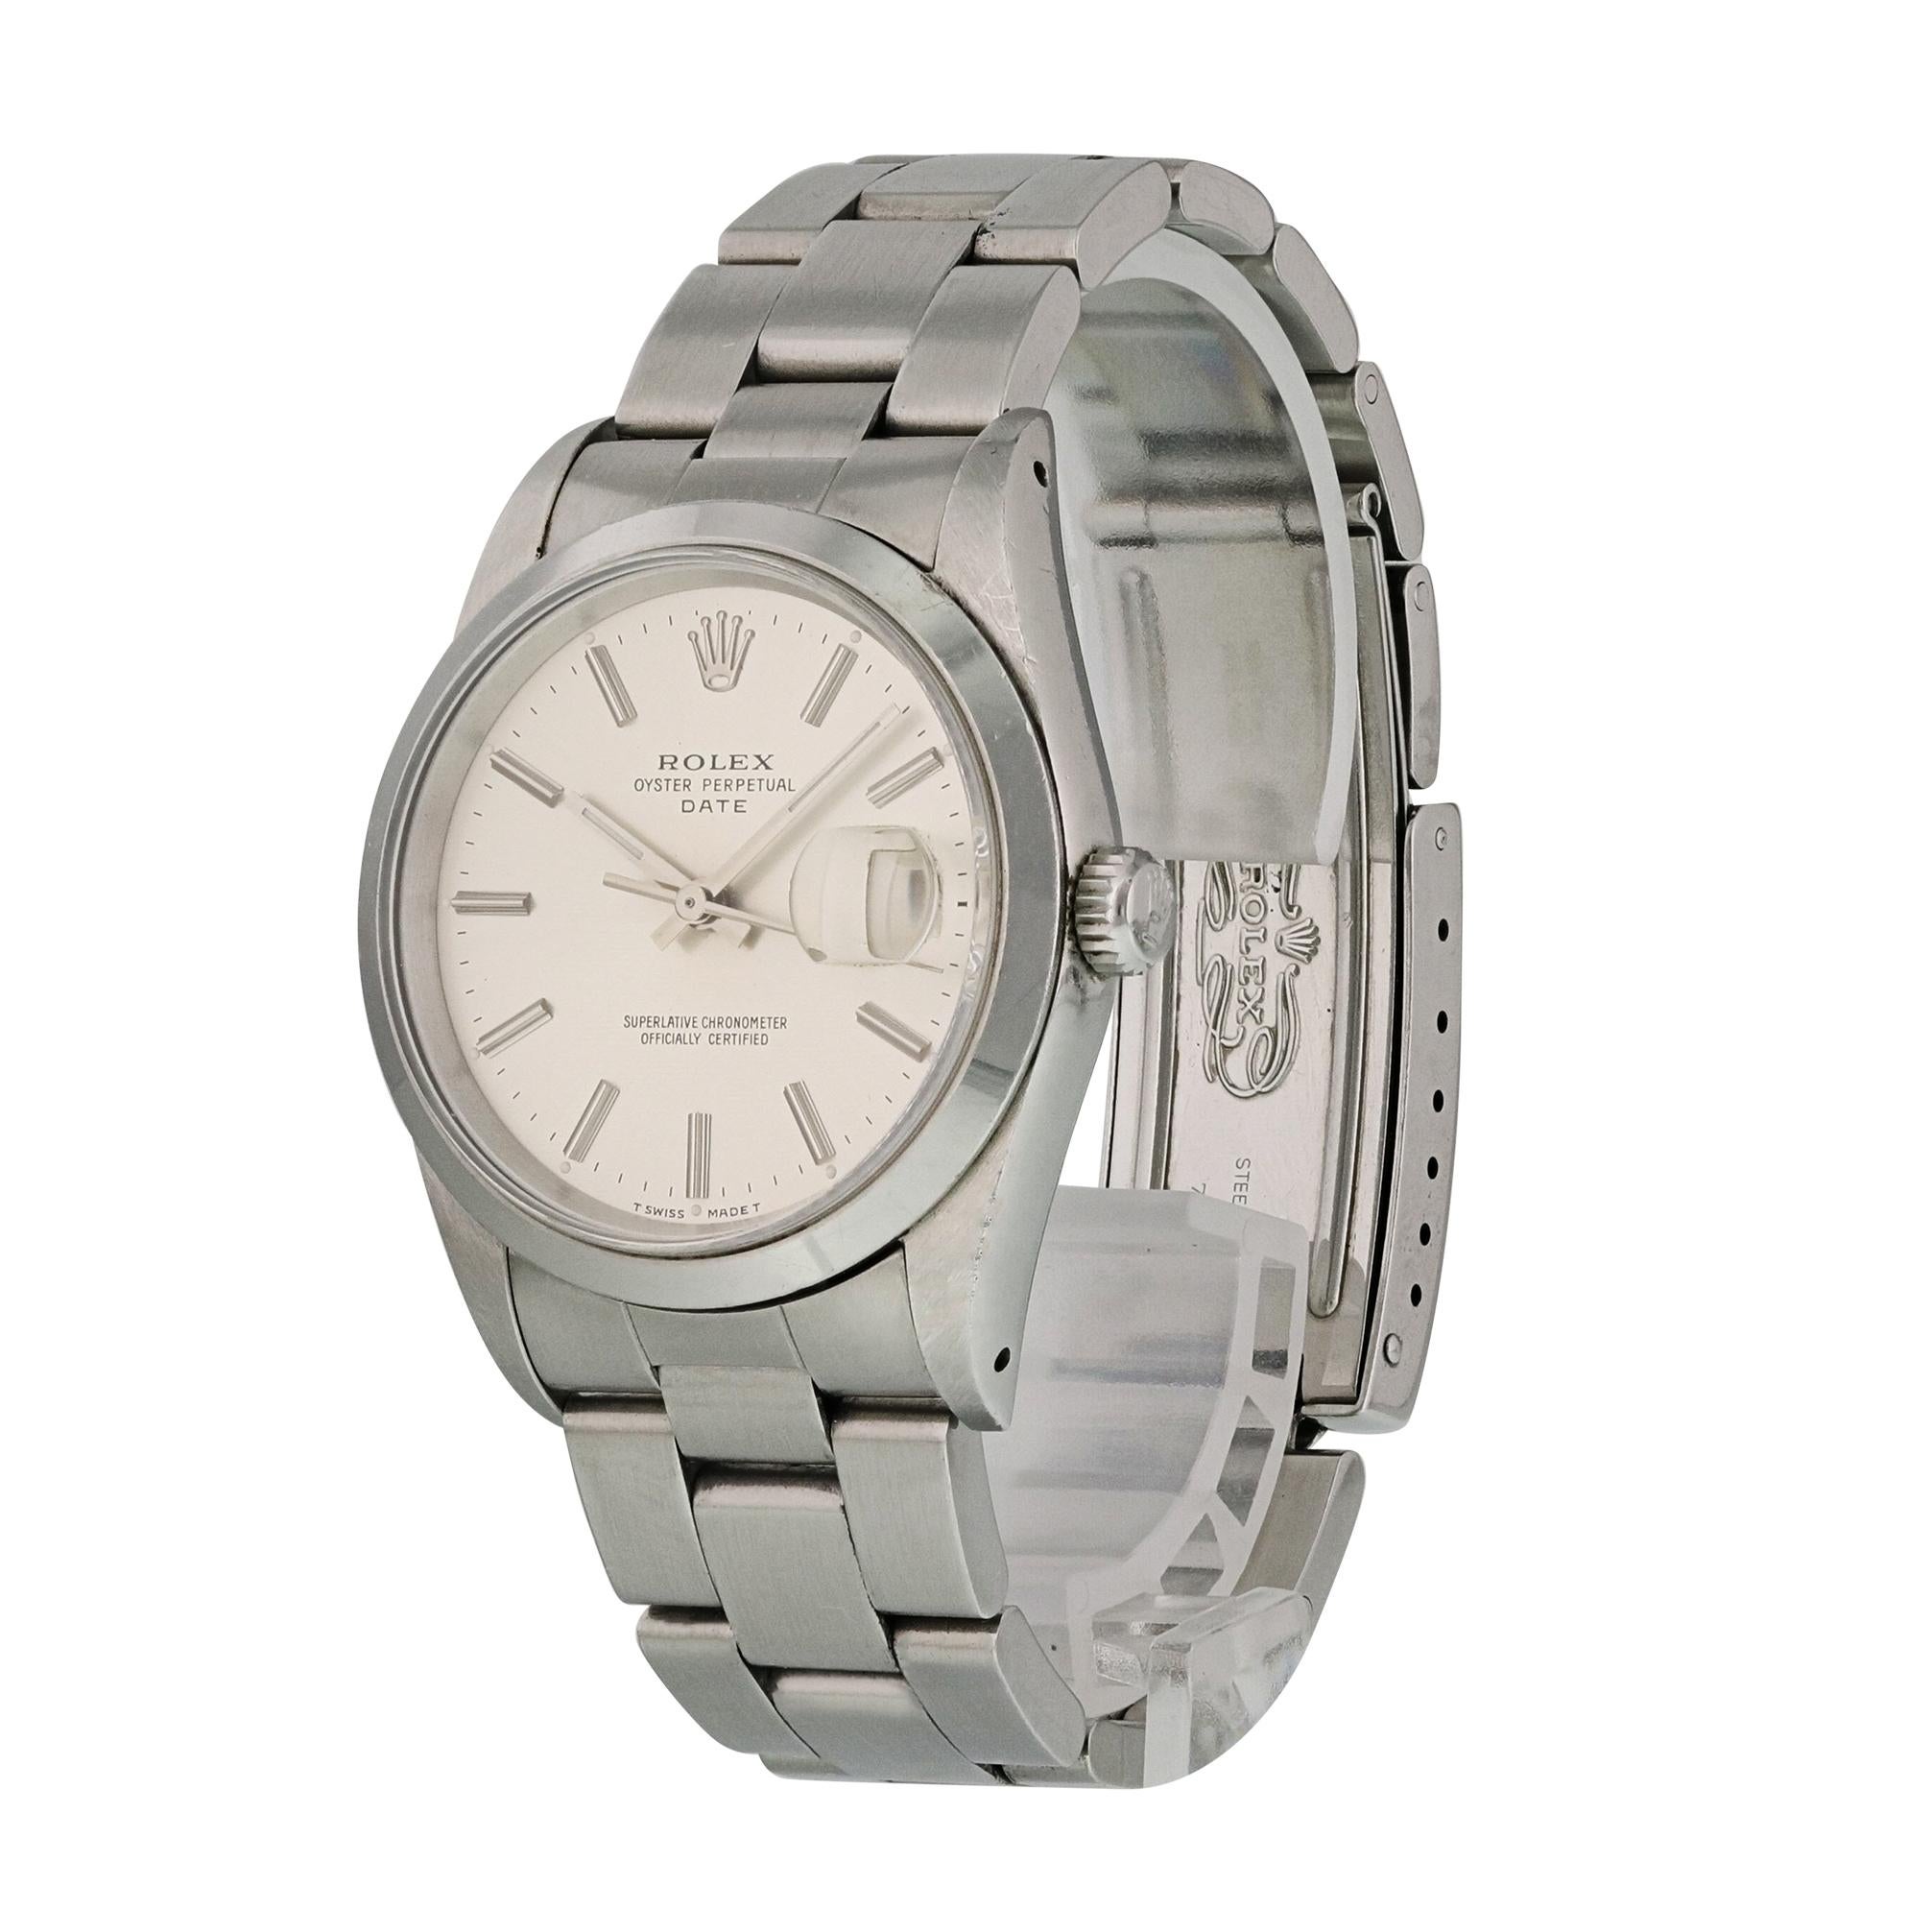 Rolex Oyster Perpetual Date 15200 Mens Watch. 34 mm stainless steel case with a smooth bezel. Black dial with steel luminous hands and indexes. Minute markers around the outer dial. Magnified date display at the 3 o'clock. Stainless steel oyster